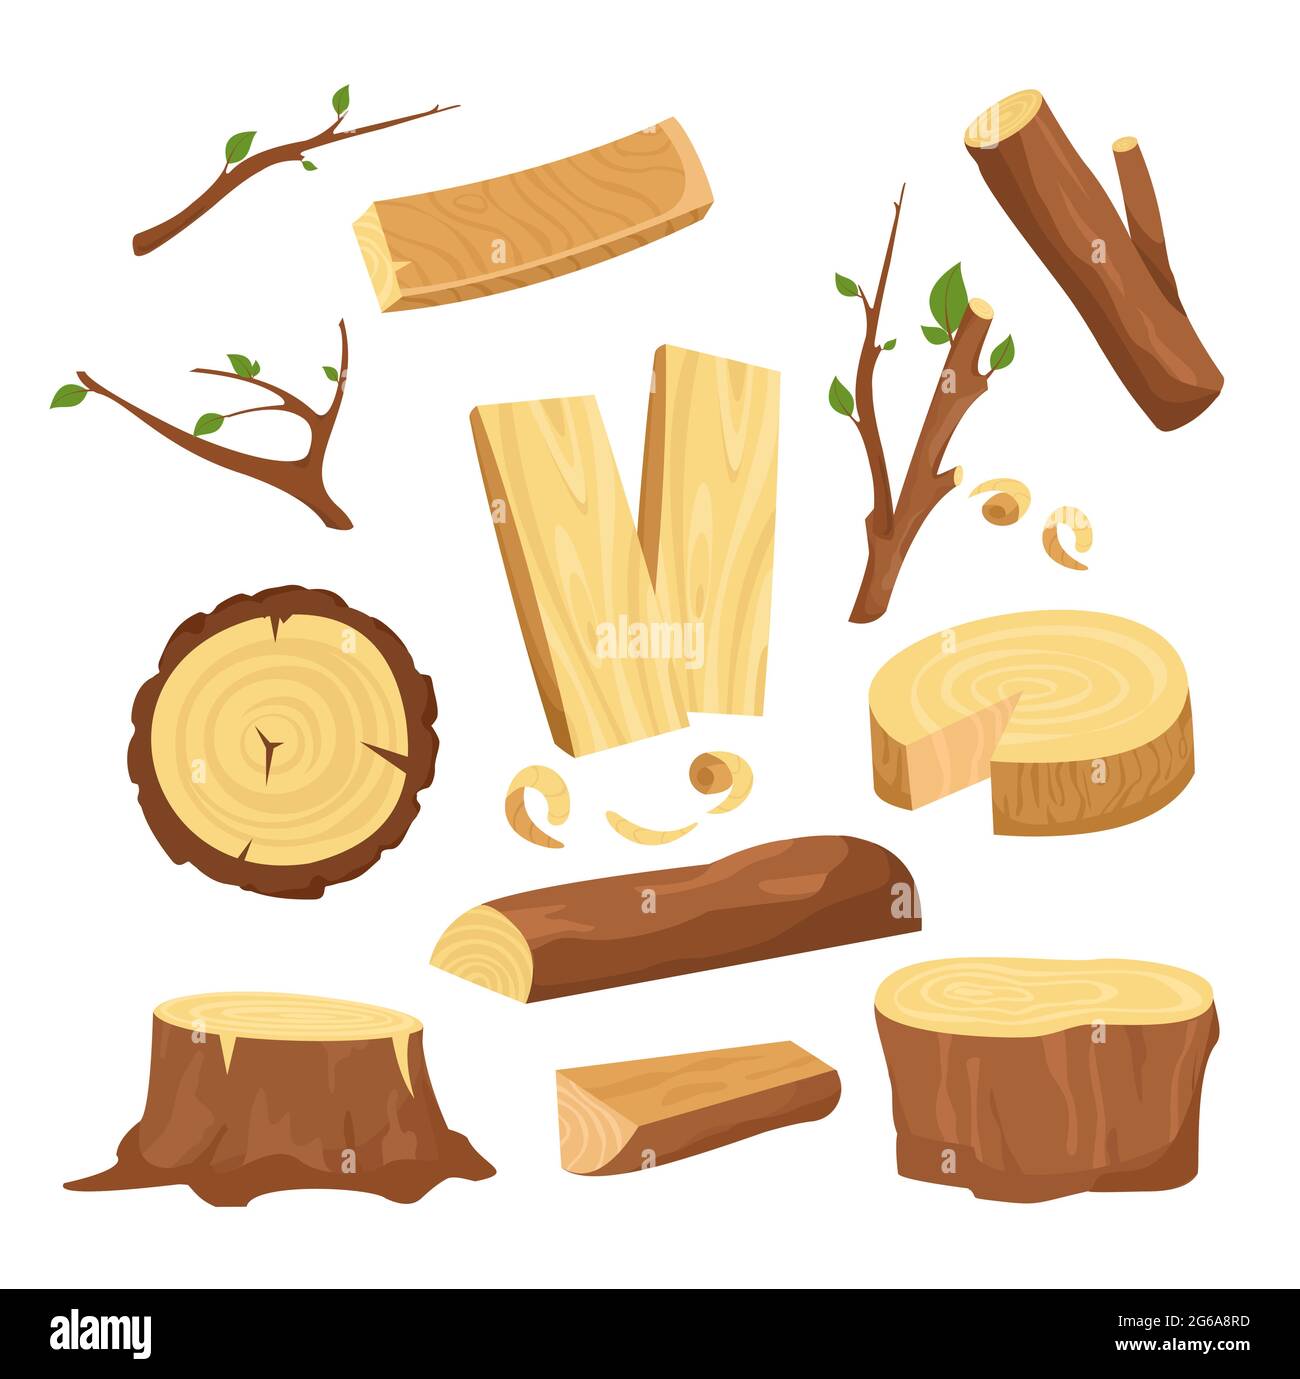 Vector illustration set of materials for wood industry, tree logs, wood trunks, chopped firewood wooden planks, stump, twigs and trunks in cartoon Stock Vector